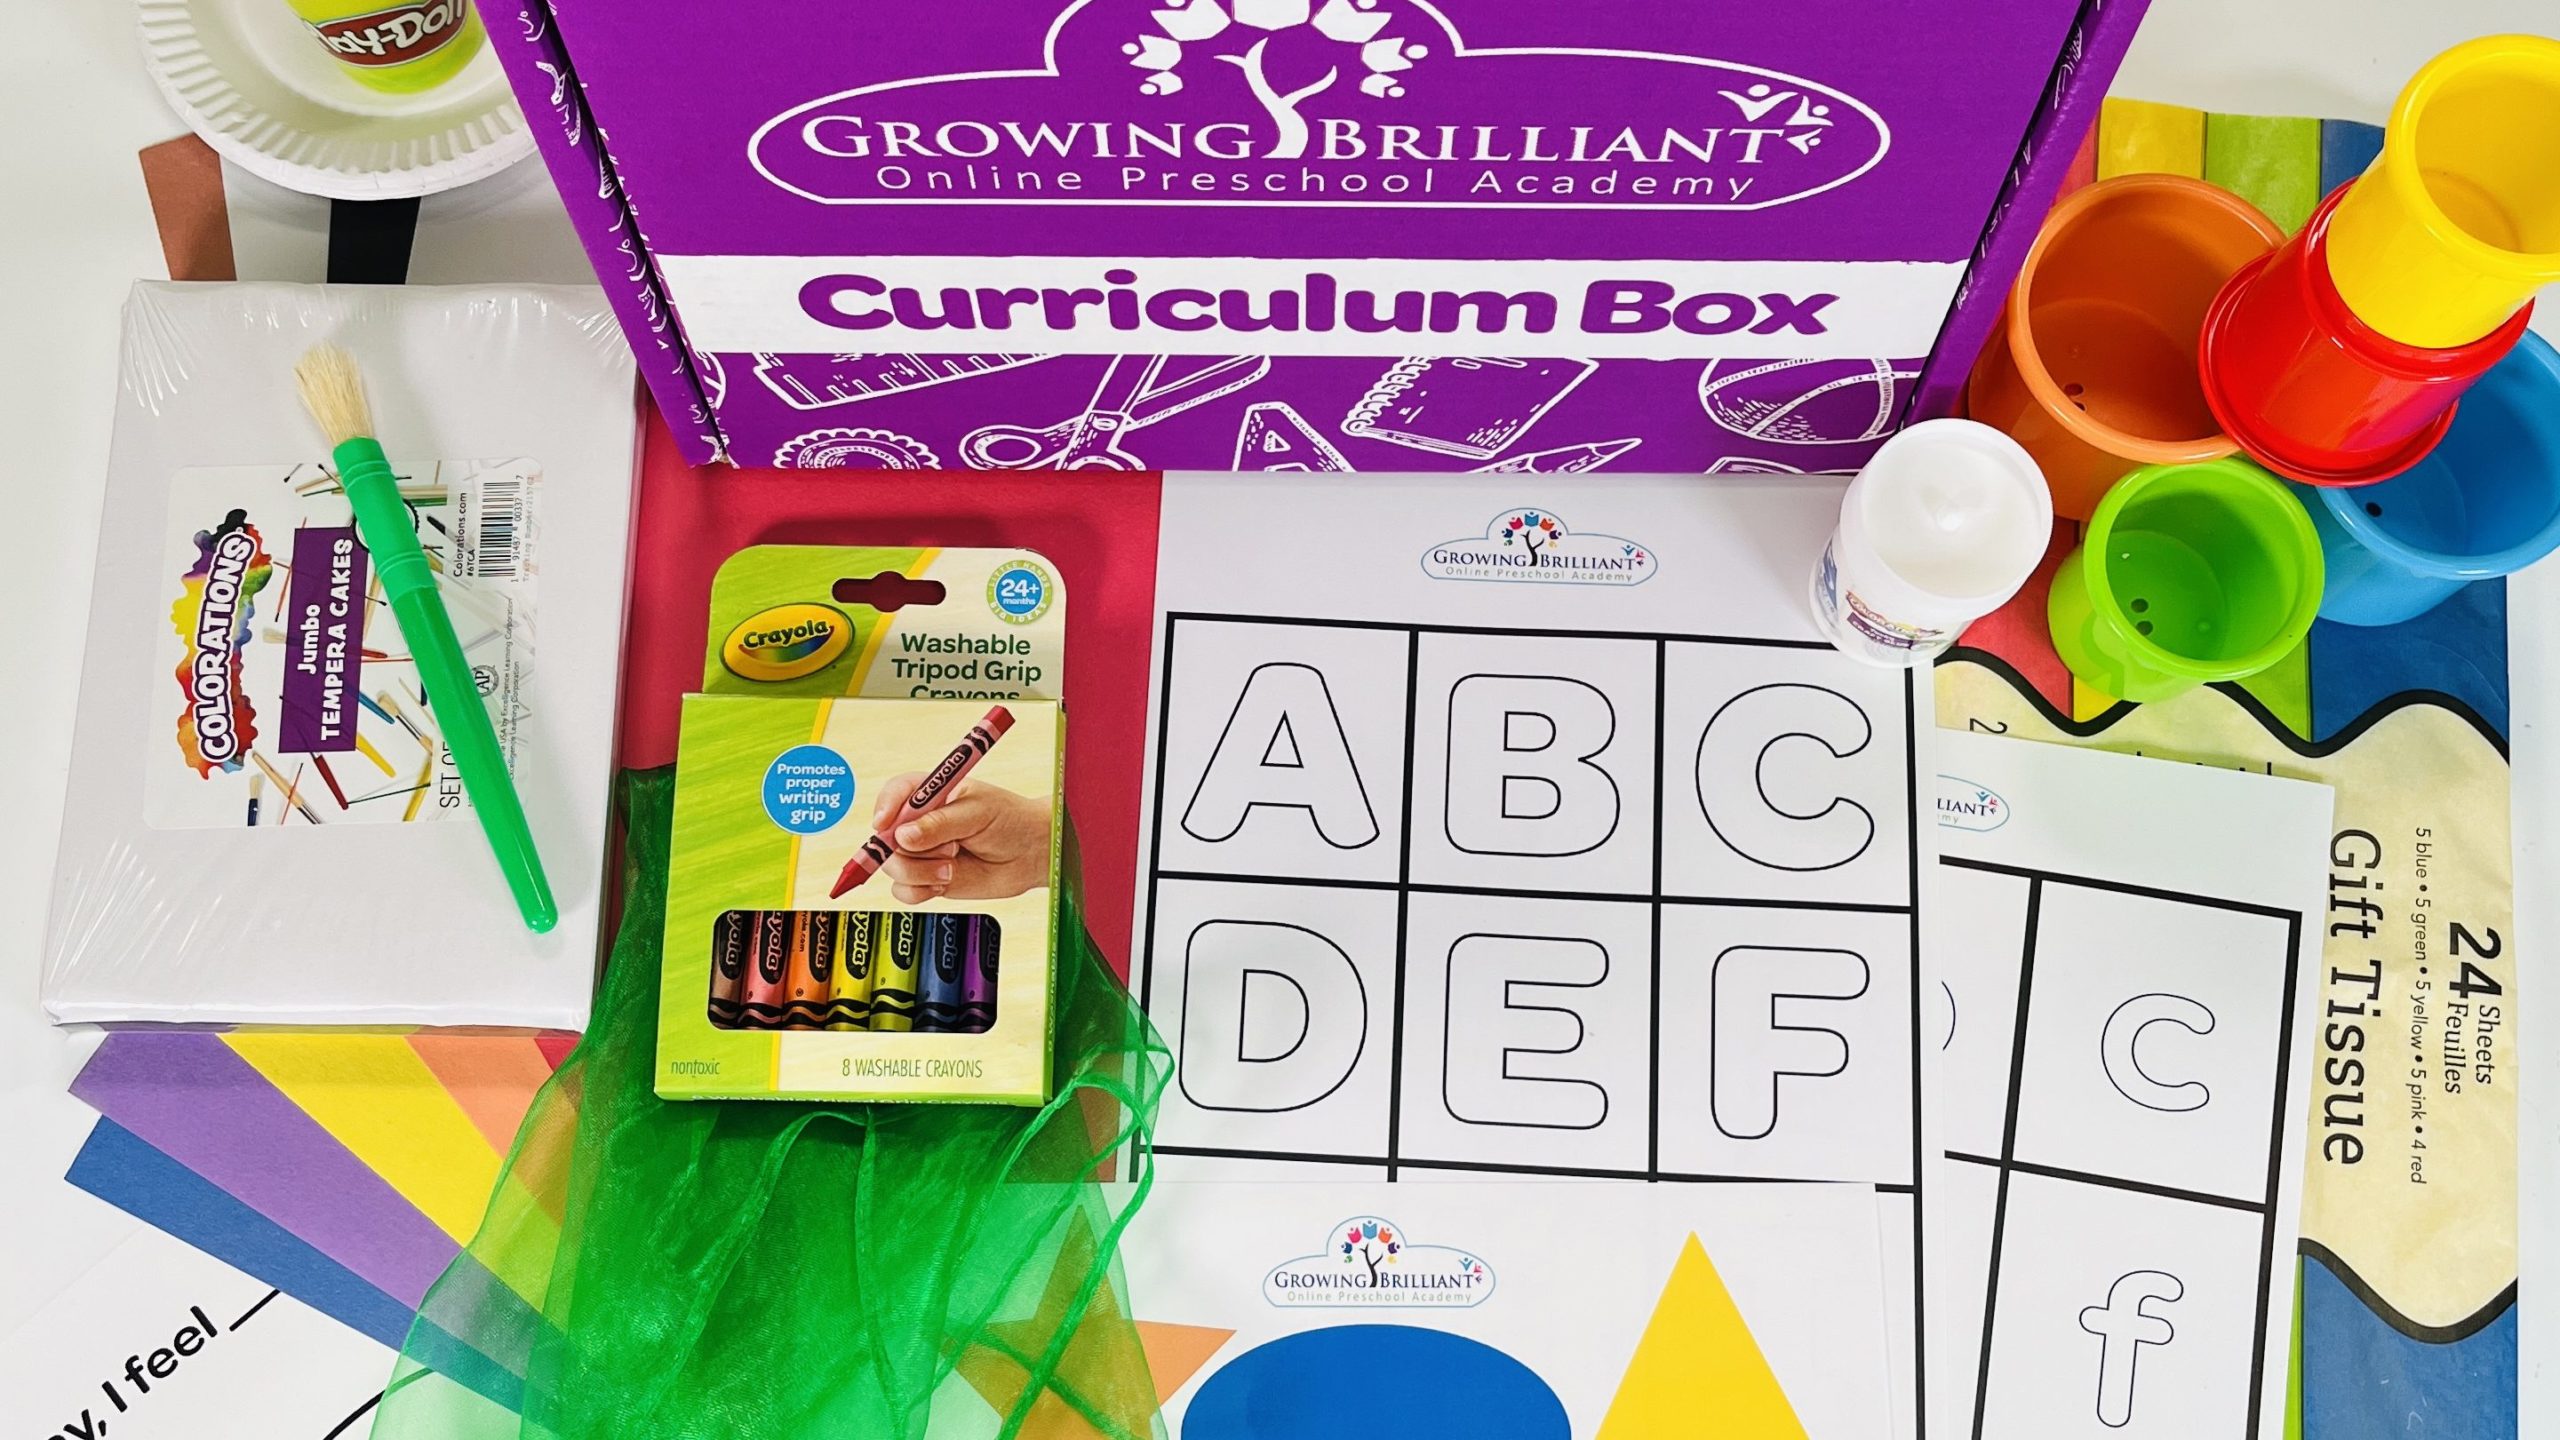 Curriculum box for Online Preschool For 2 to 3-Year-Olds